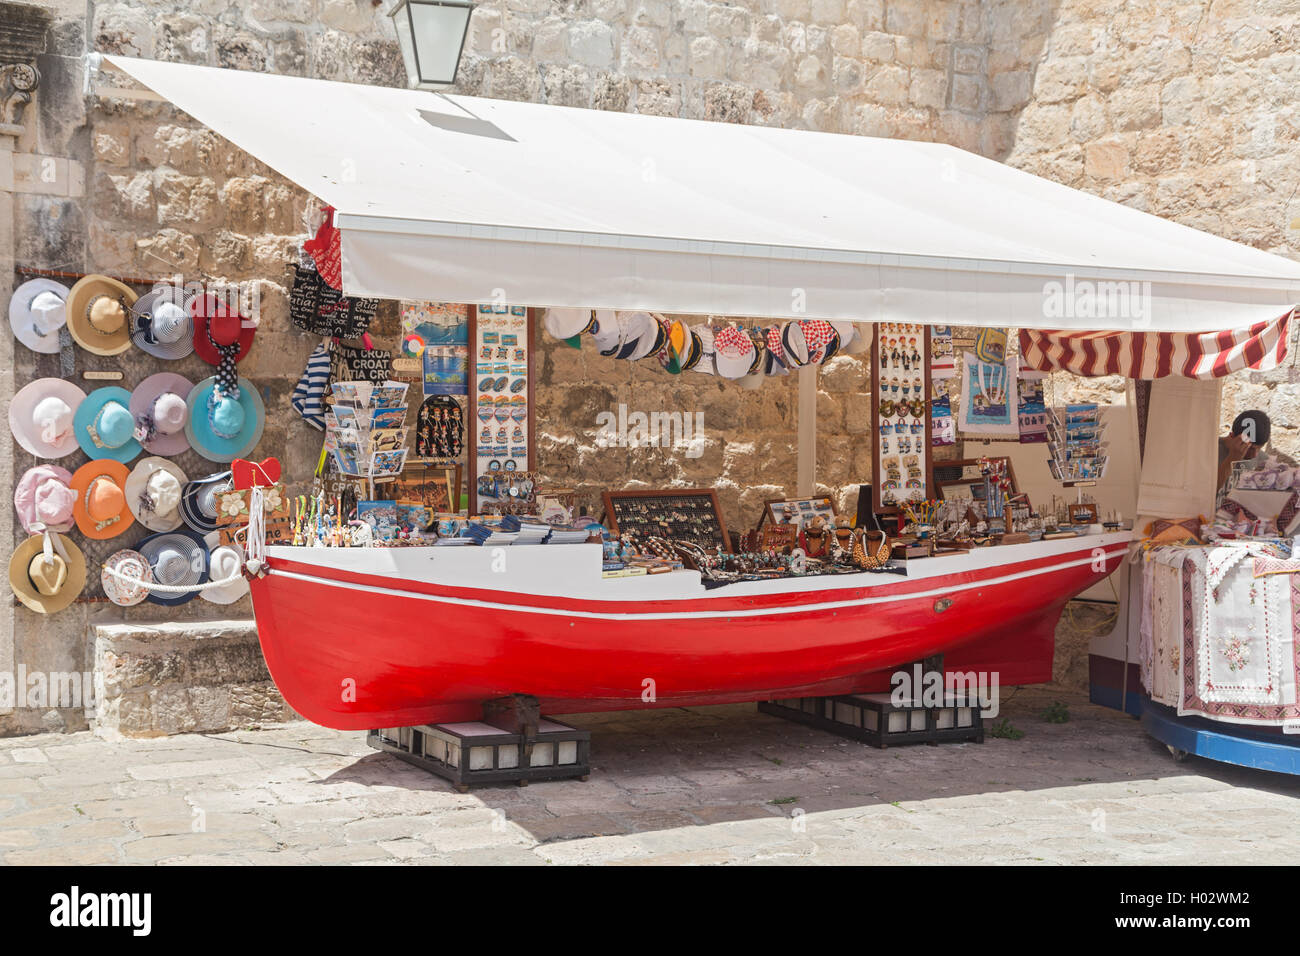 DUBROVNIK, CROATIA - MAY 27, 2014: Souvenir street stand shaped as old red boat. Stock Photo